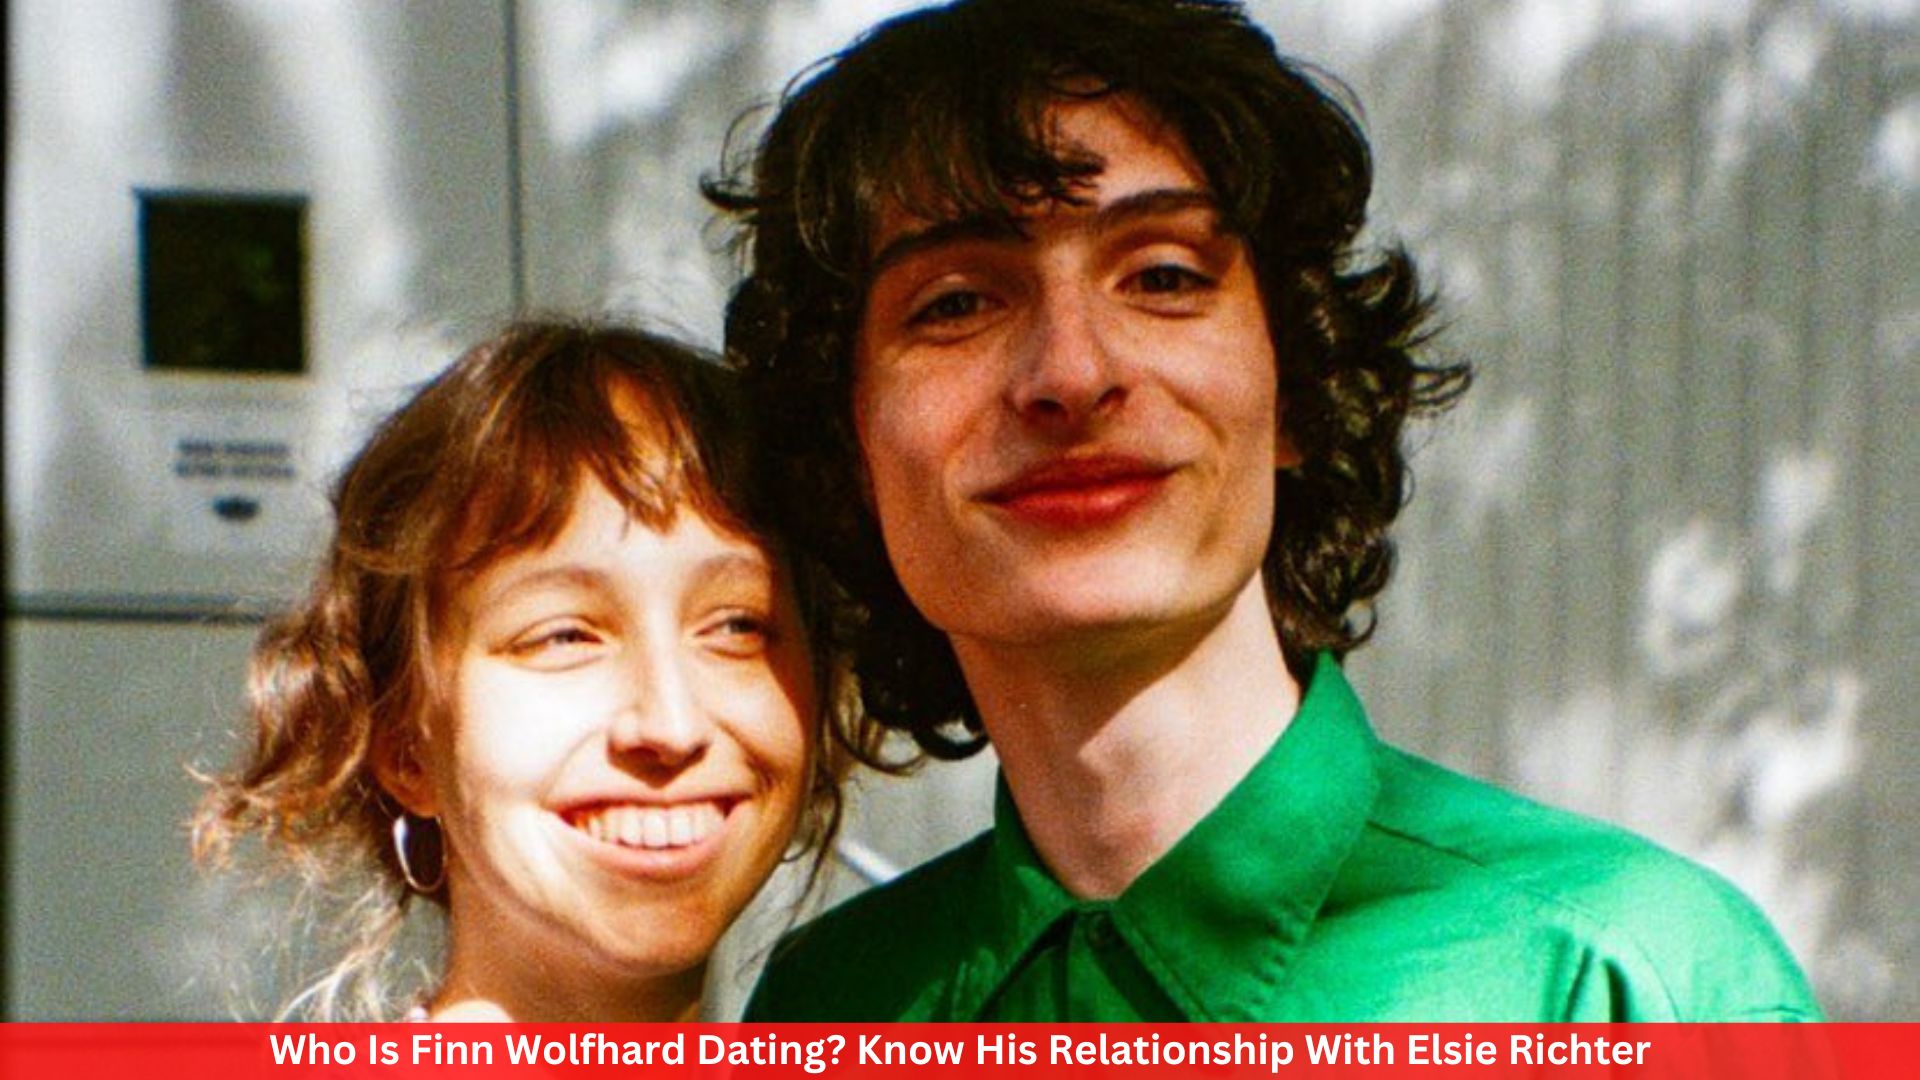 Who Is Finn Wolfhard Dating? Know His Relationship With Elsie Richter